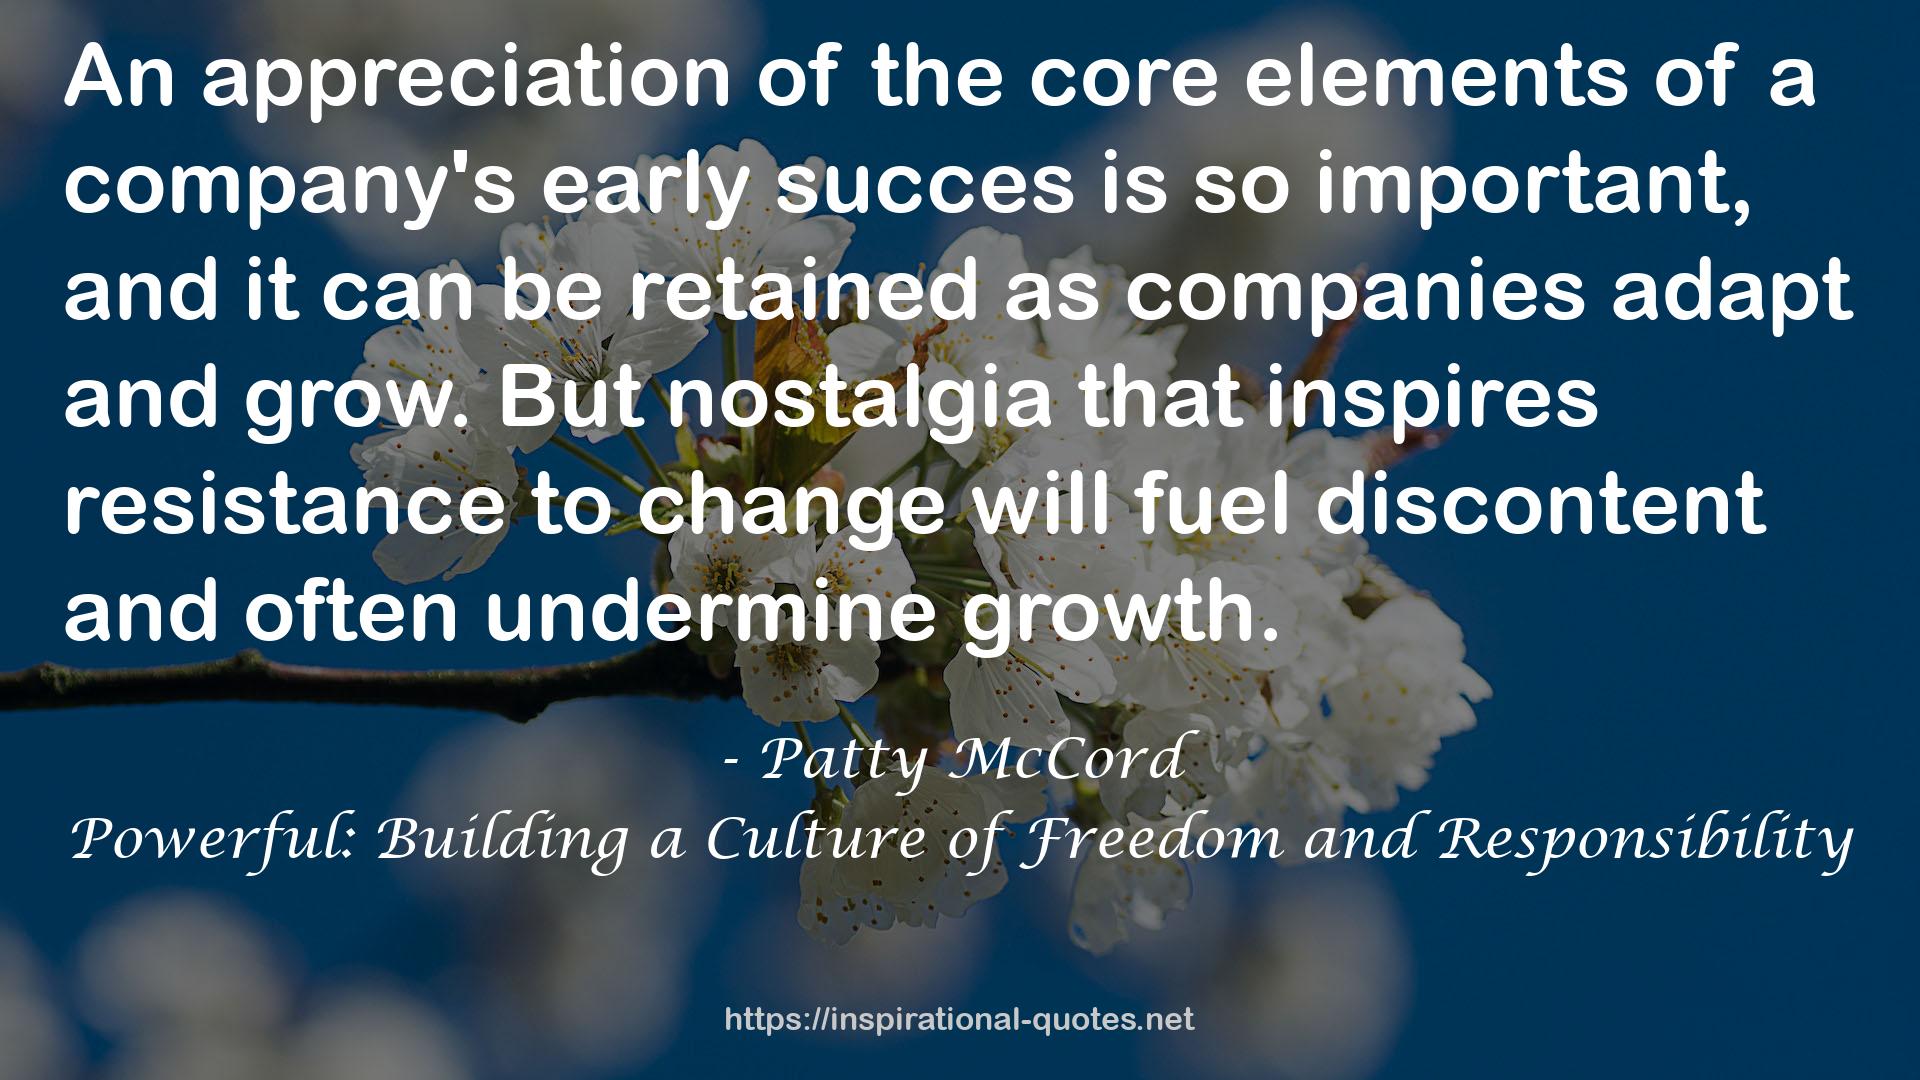 Powerful: Building a Culture of Freedom and Responsibility QUOTES